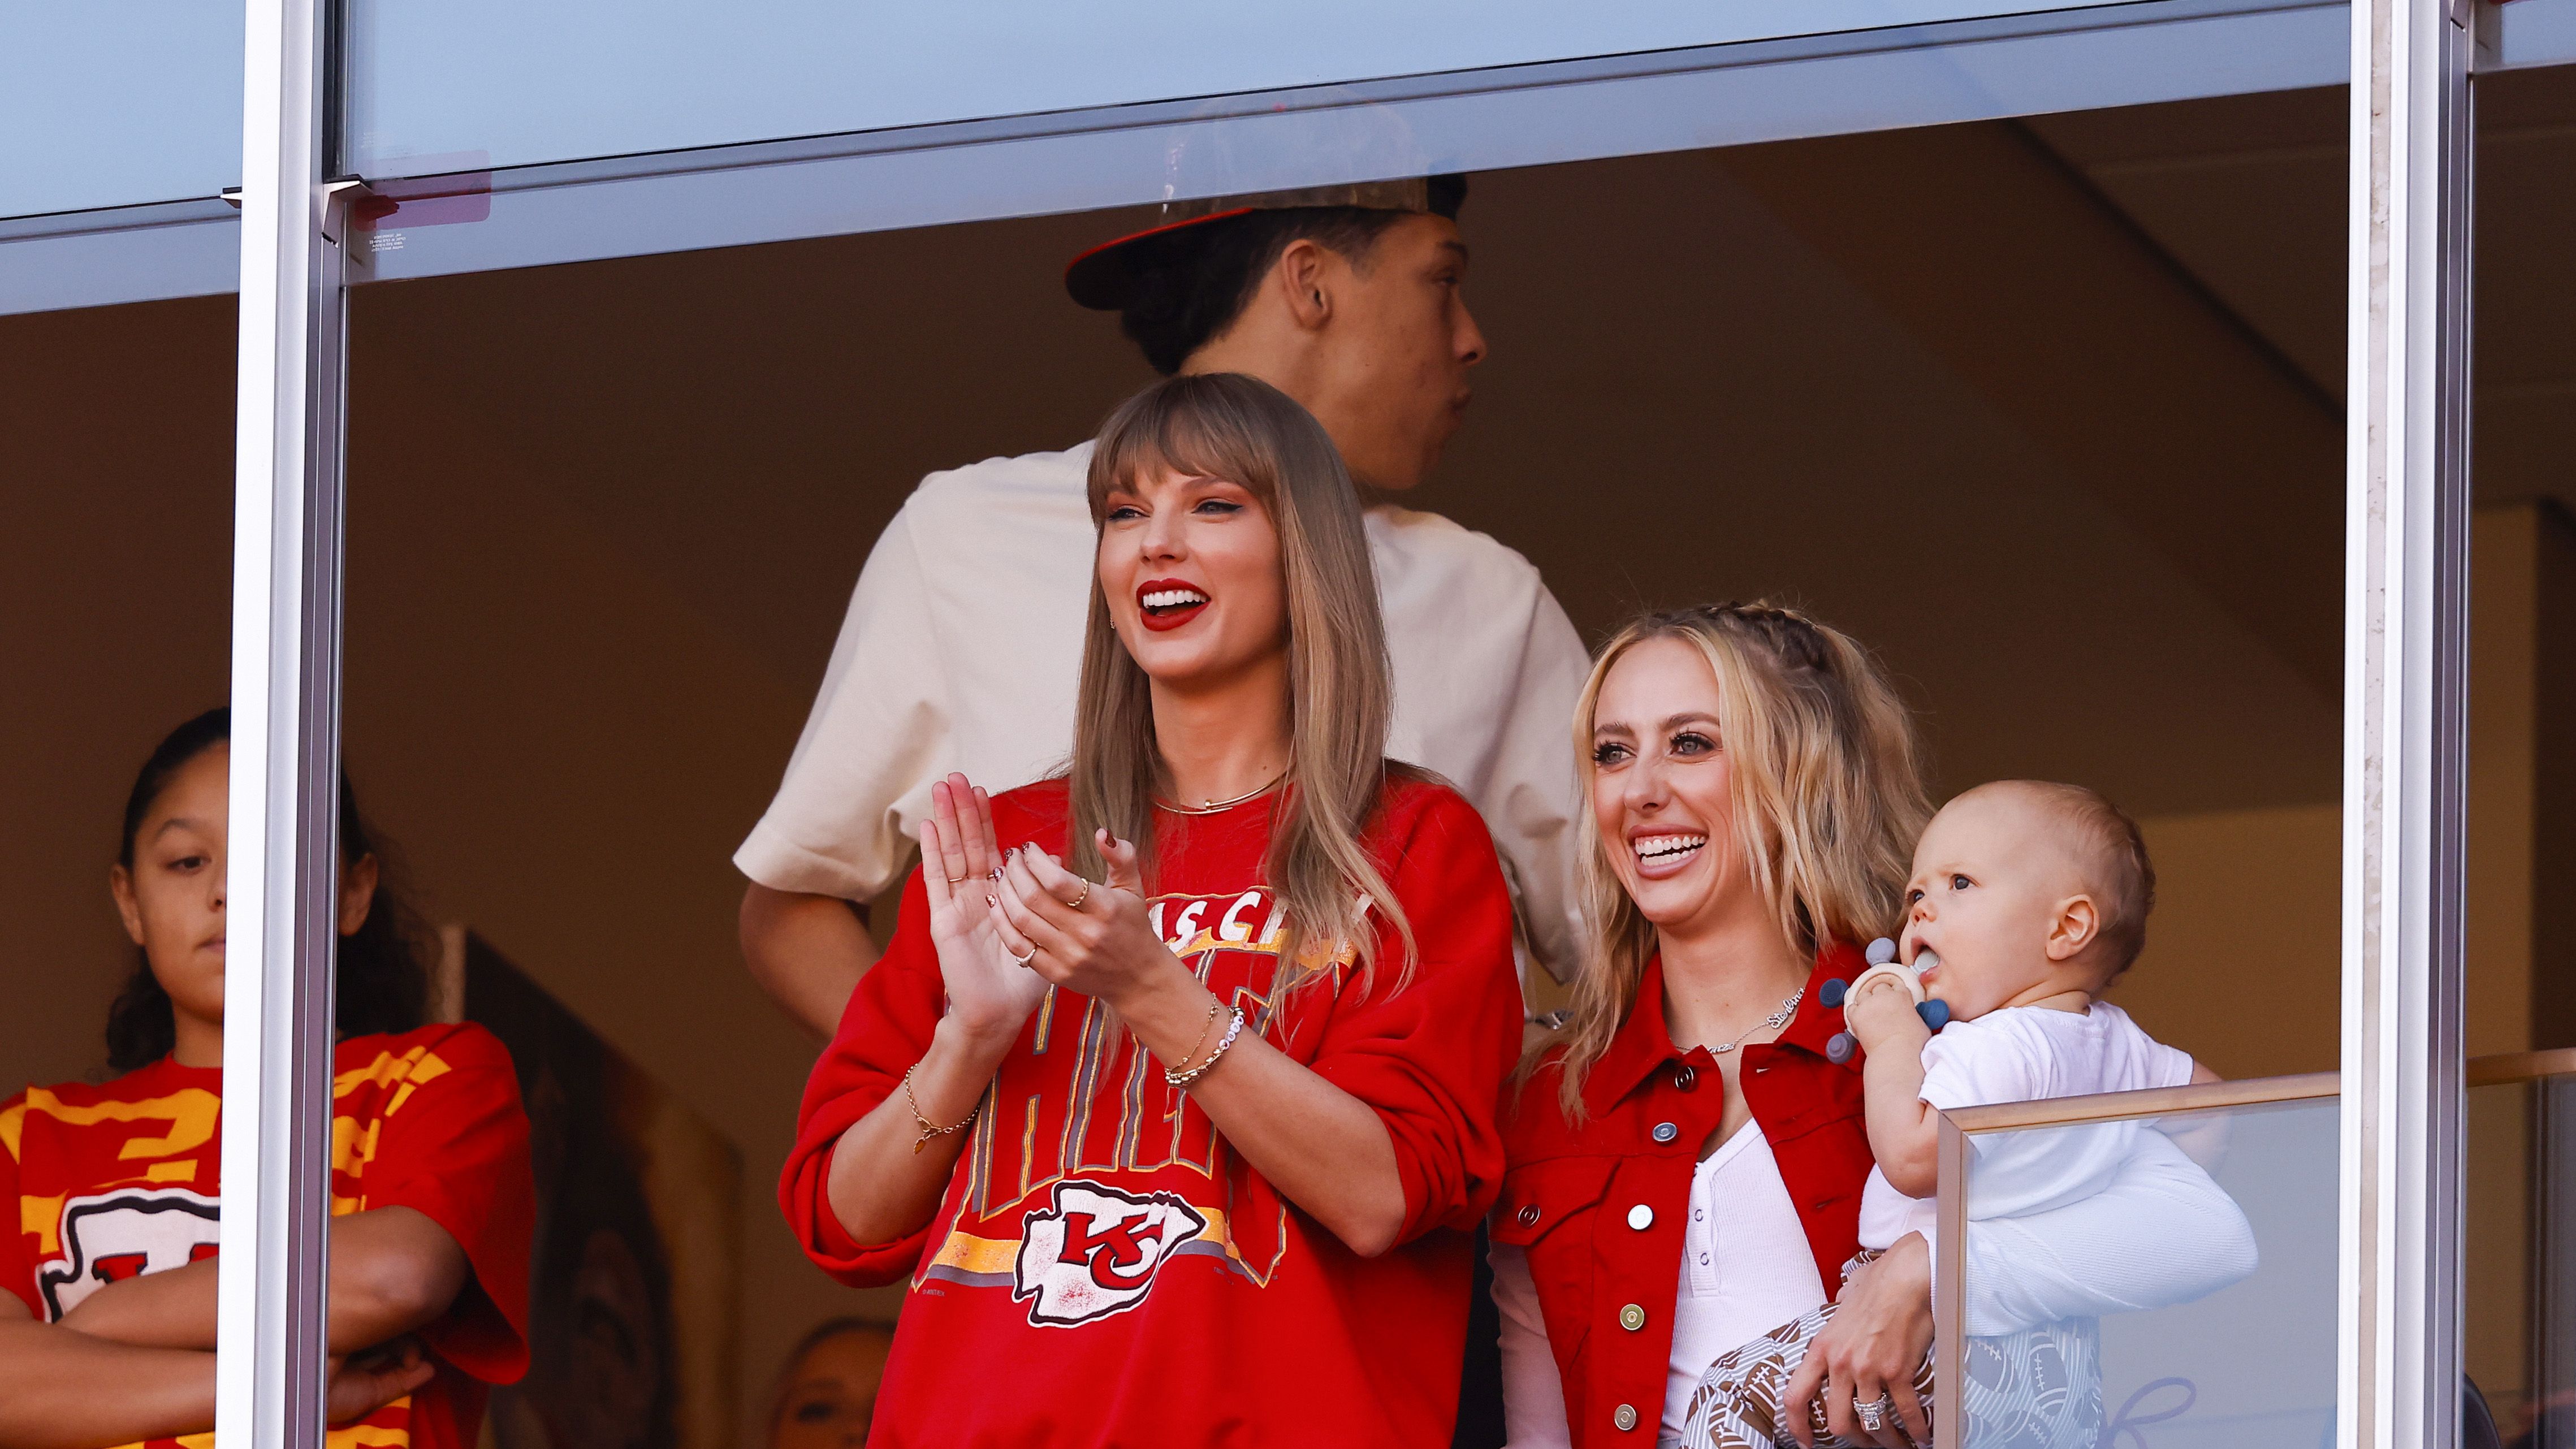 https://hips.hearstapps.com/hmg-prod/images/taylor-swift-and-brittany-mahomes-look-on-during-a-game-news-photo-1700426432.jpg?crop=1xw:0.84356xh;center,top